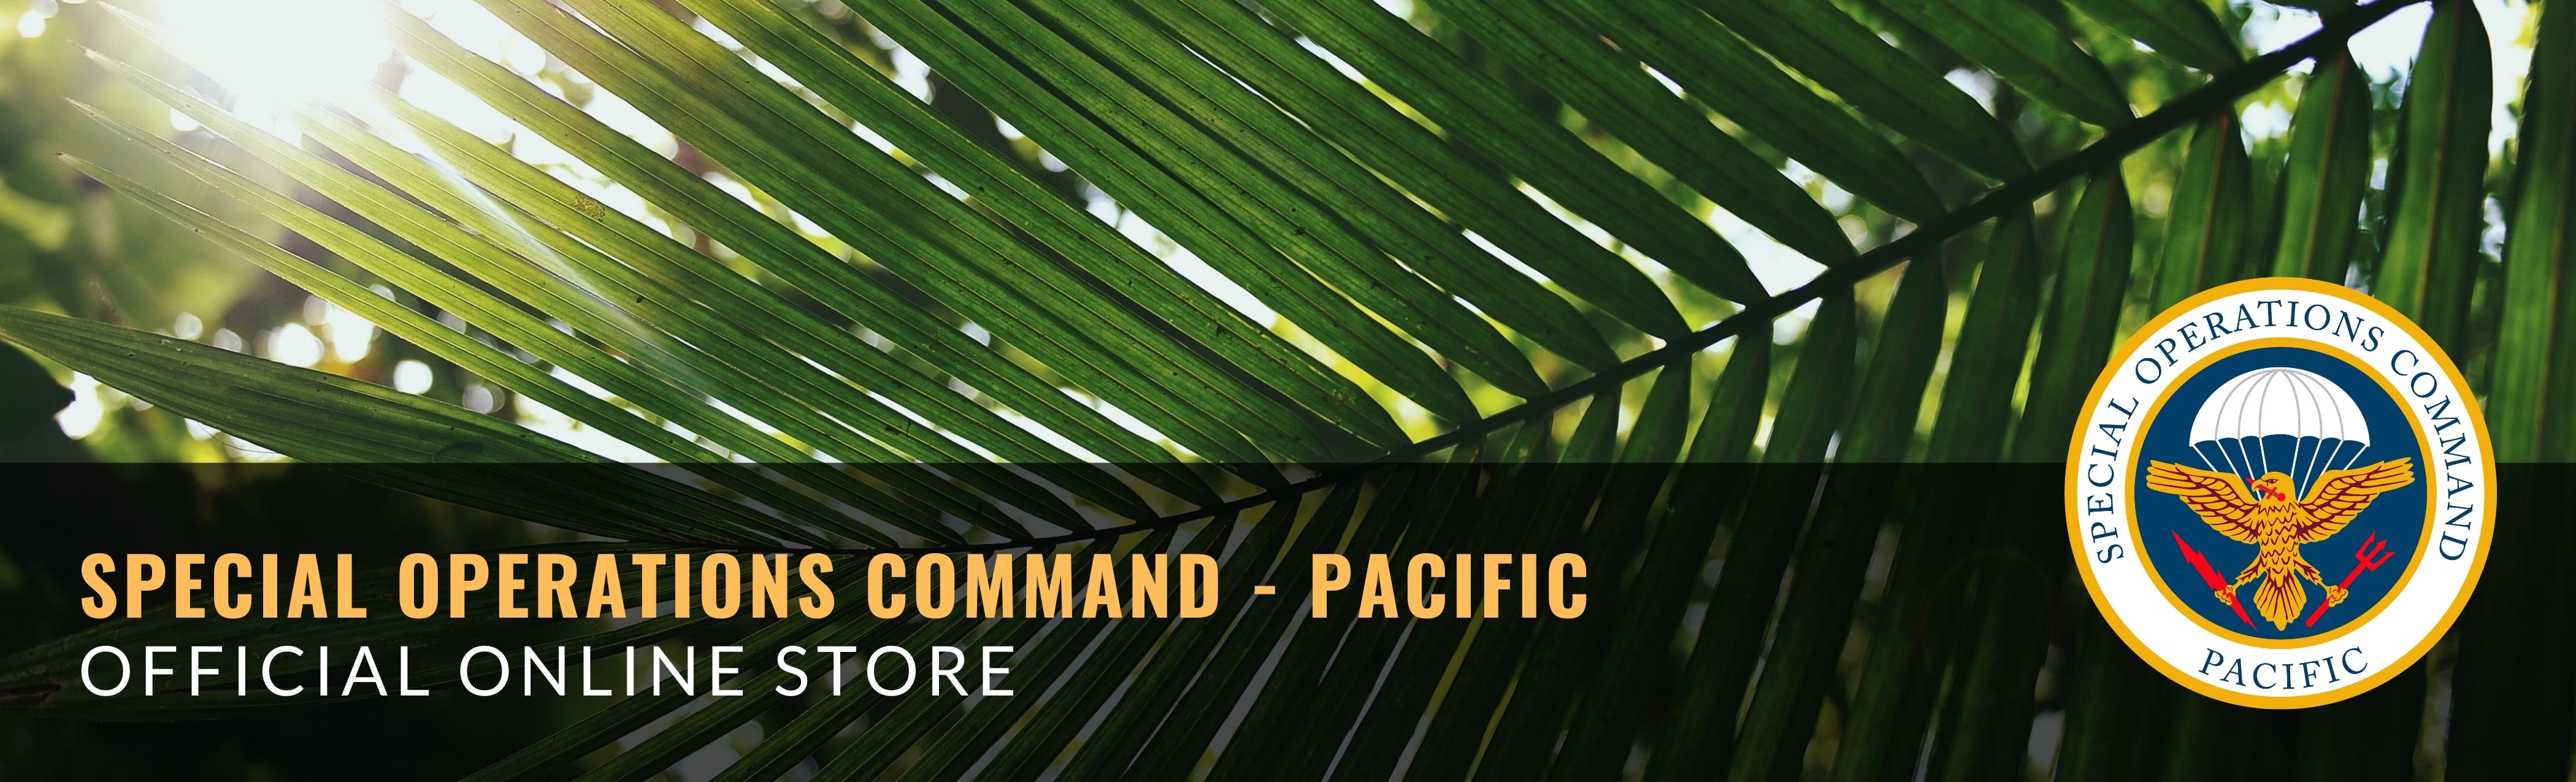 Special Operations Command Pacific